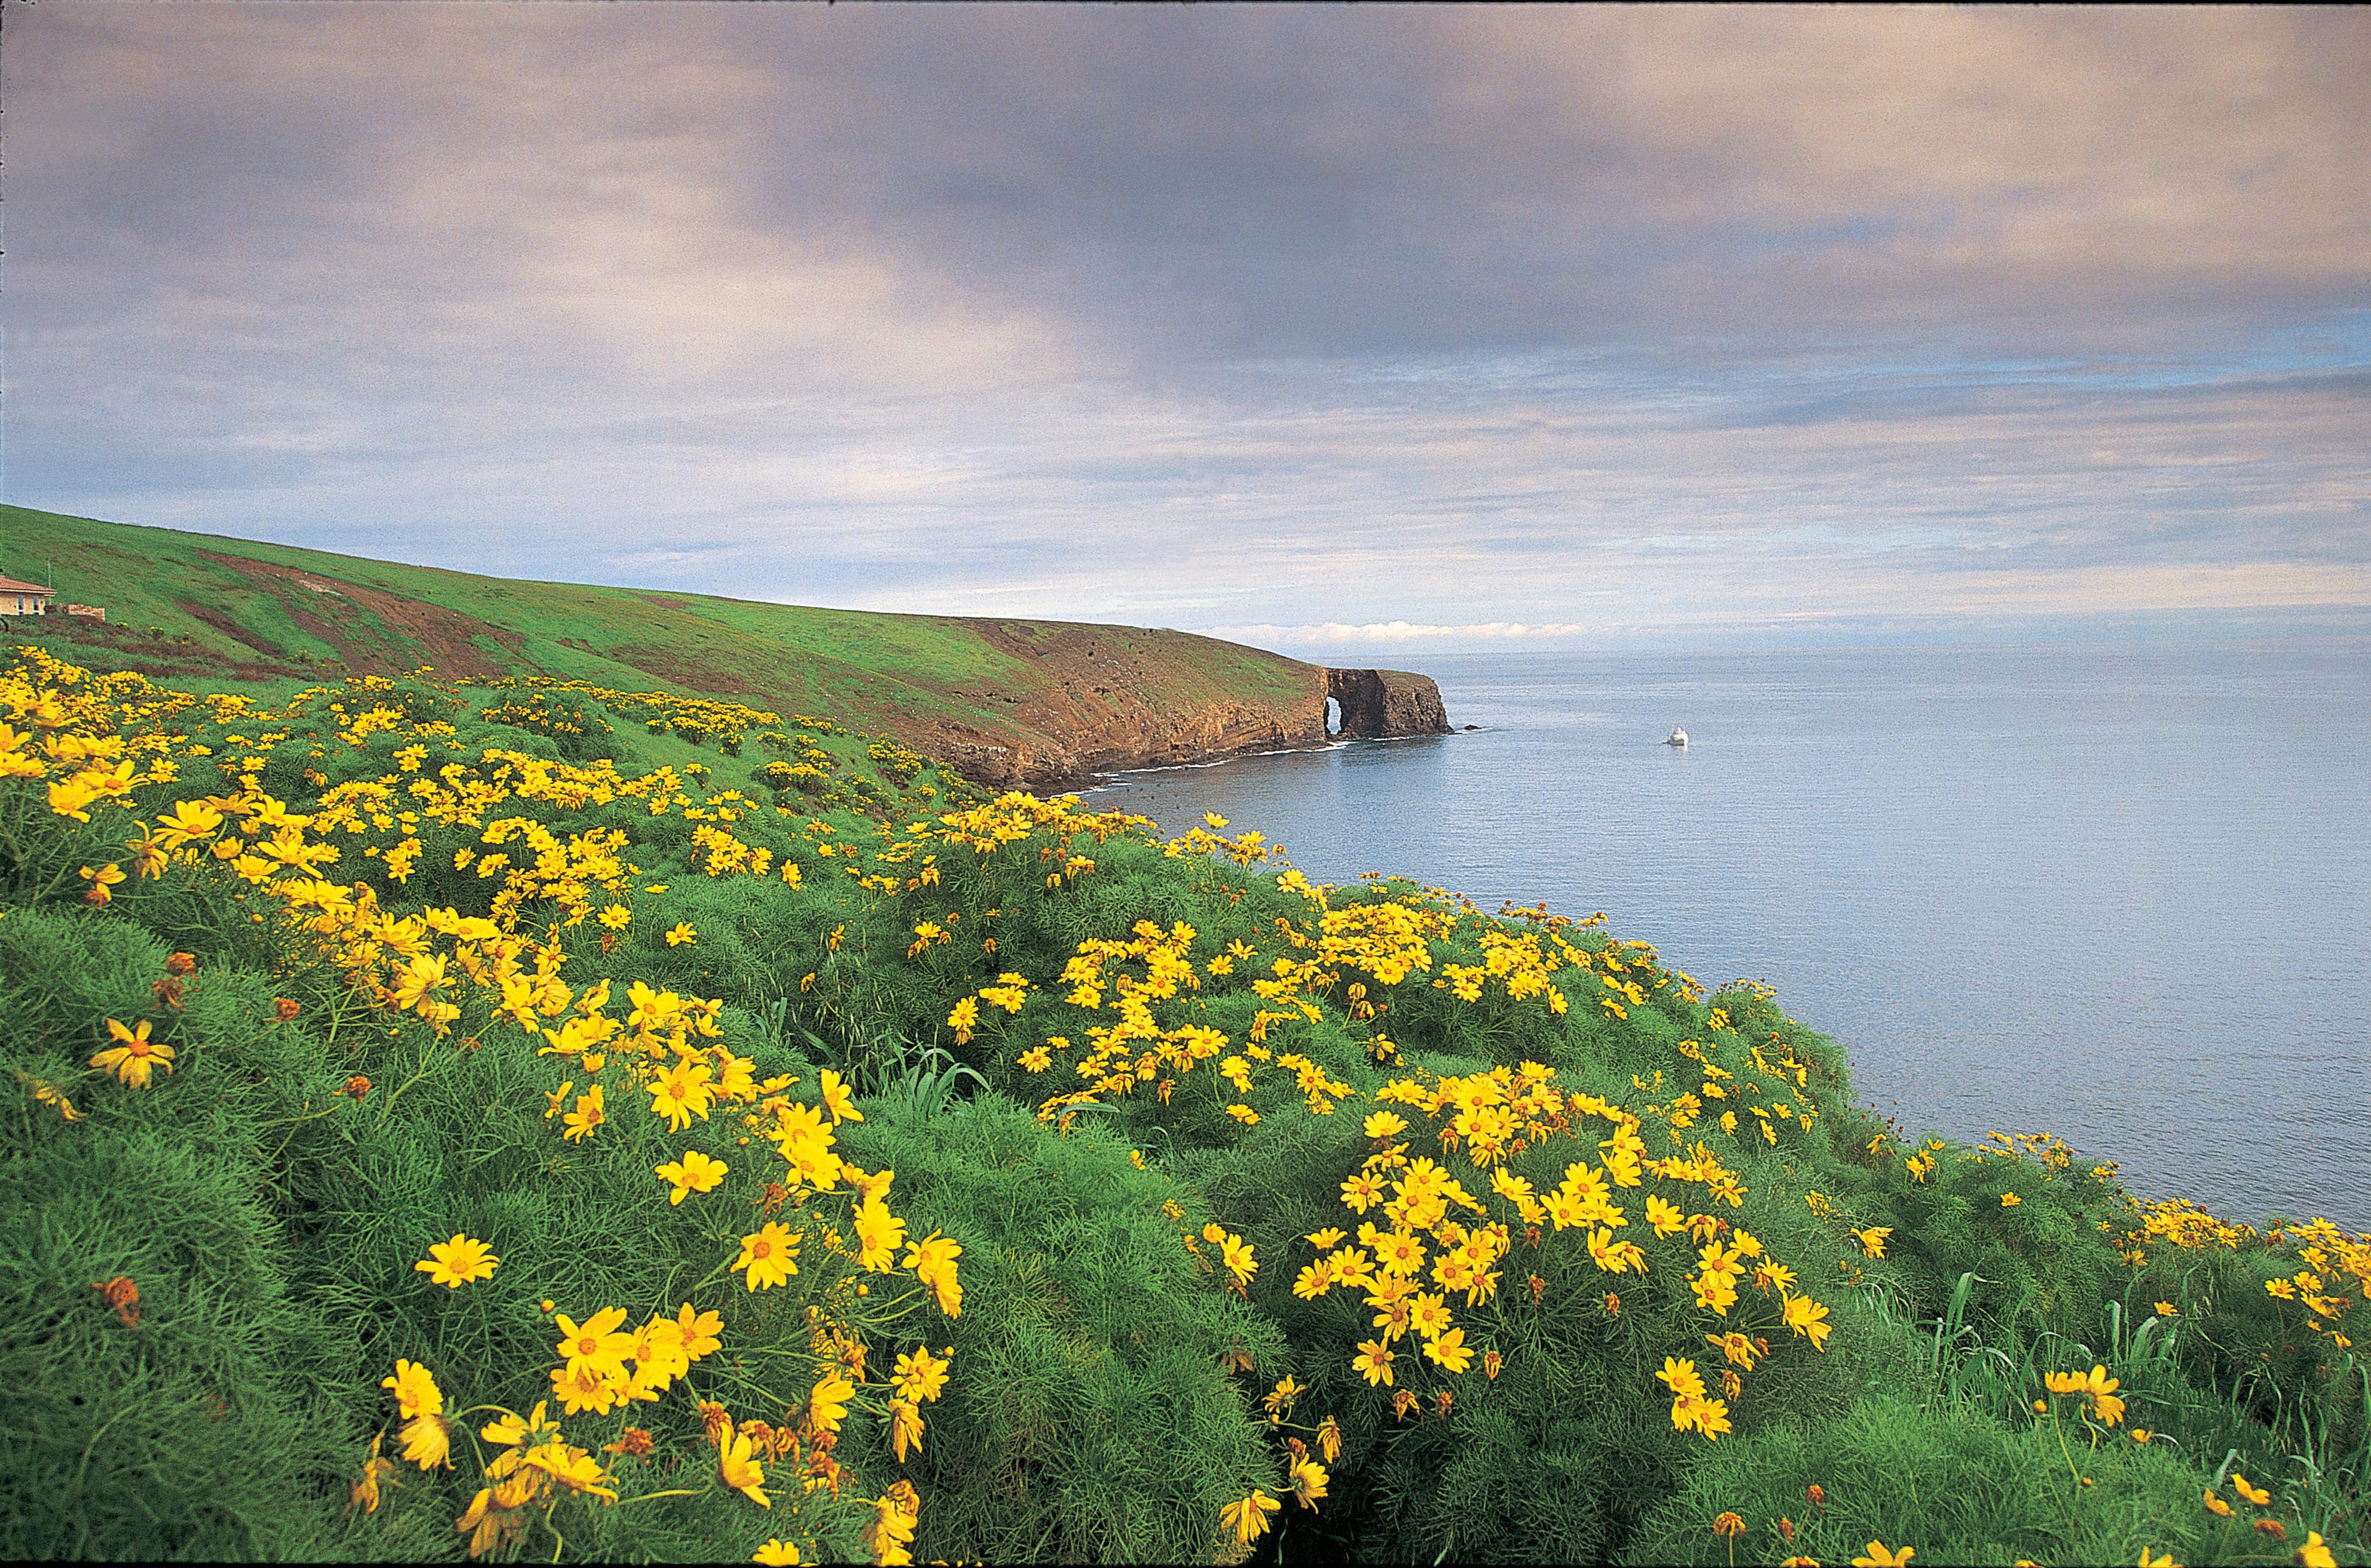 Yellow flowers in foreground extending out along a rocky coastline to a natural arch.